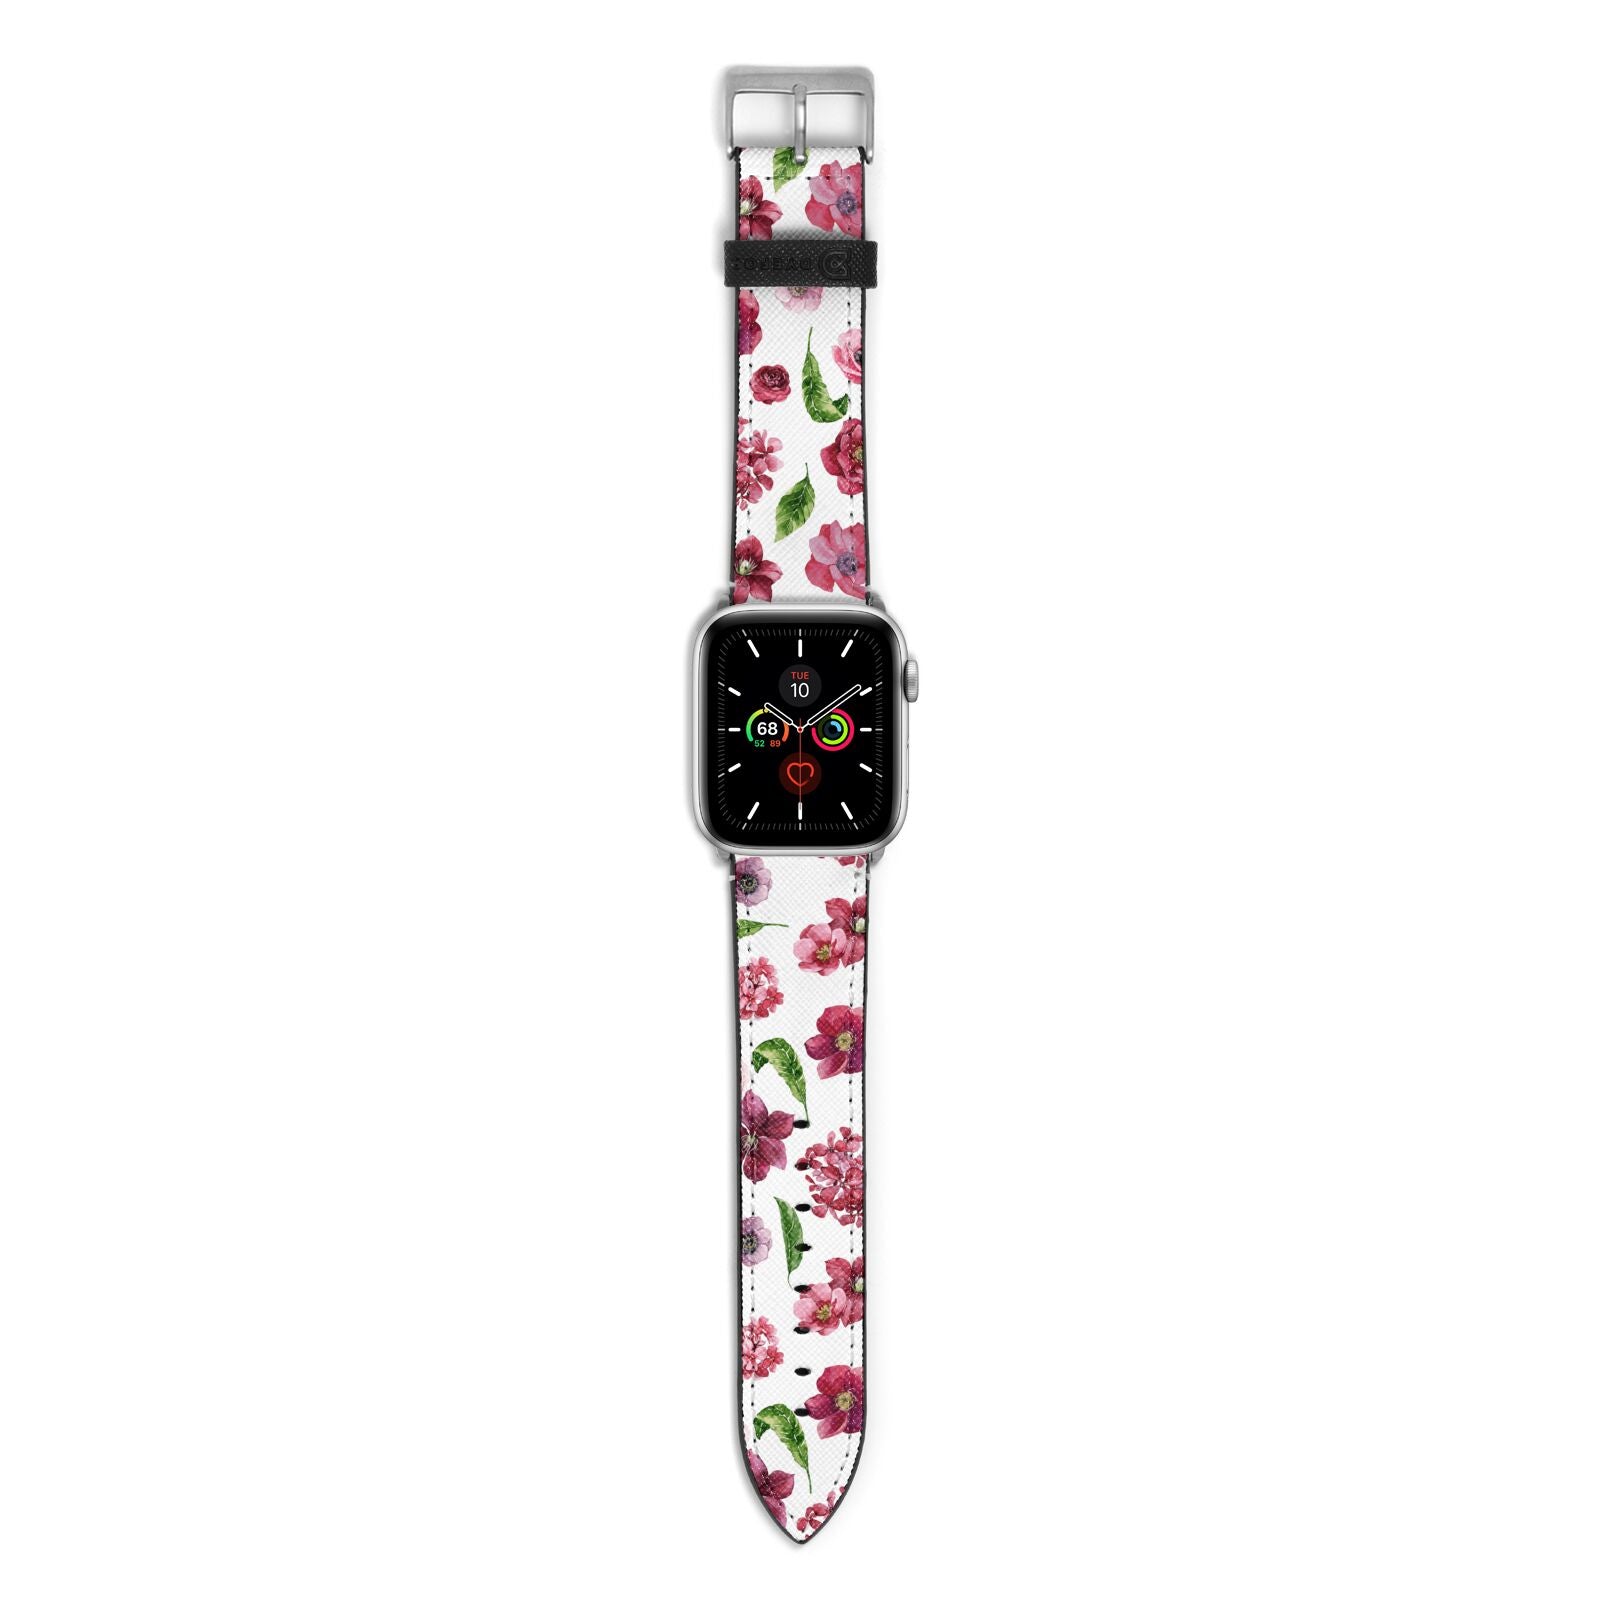 Pink Floral Apple Watch Strap with Silver Hardware